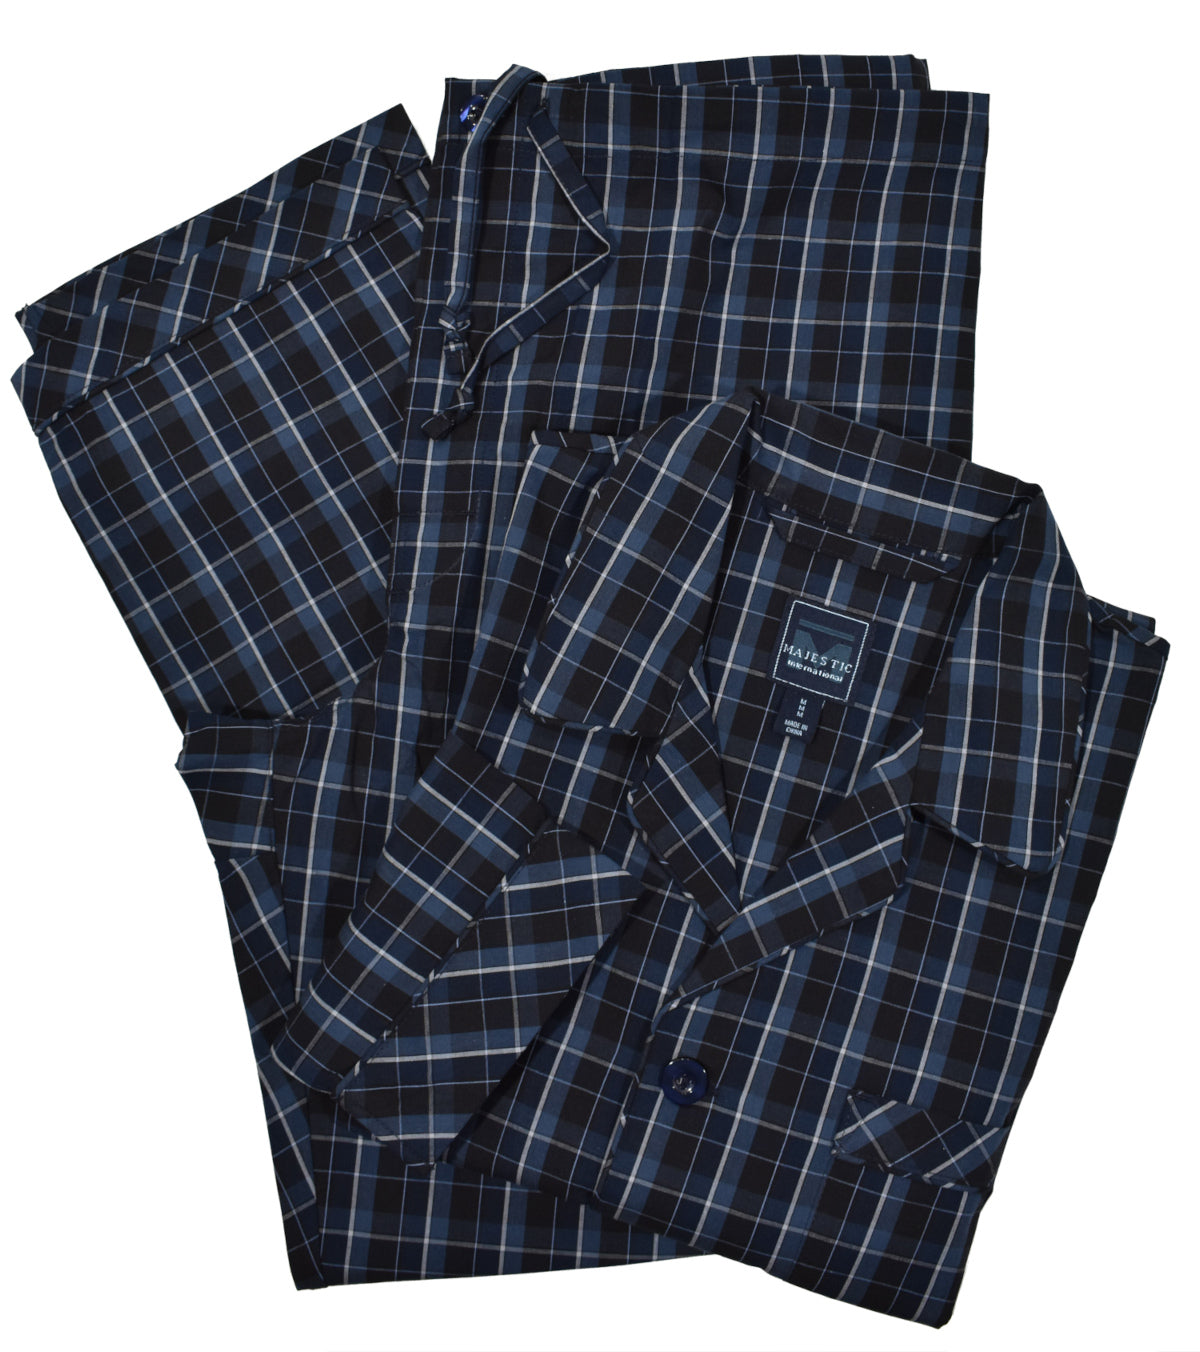 Stay comfy and chic in our ZM1904 Black Plaid Pajamas! This classic plaid style is always elegant, while its soft cotton fabric keeps you cozy. With a button-front top, drawstring and stretch waistband pants, you'll enjoy a relaxed, classic fit. Look good and feel great with this timeless pajama set!